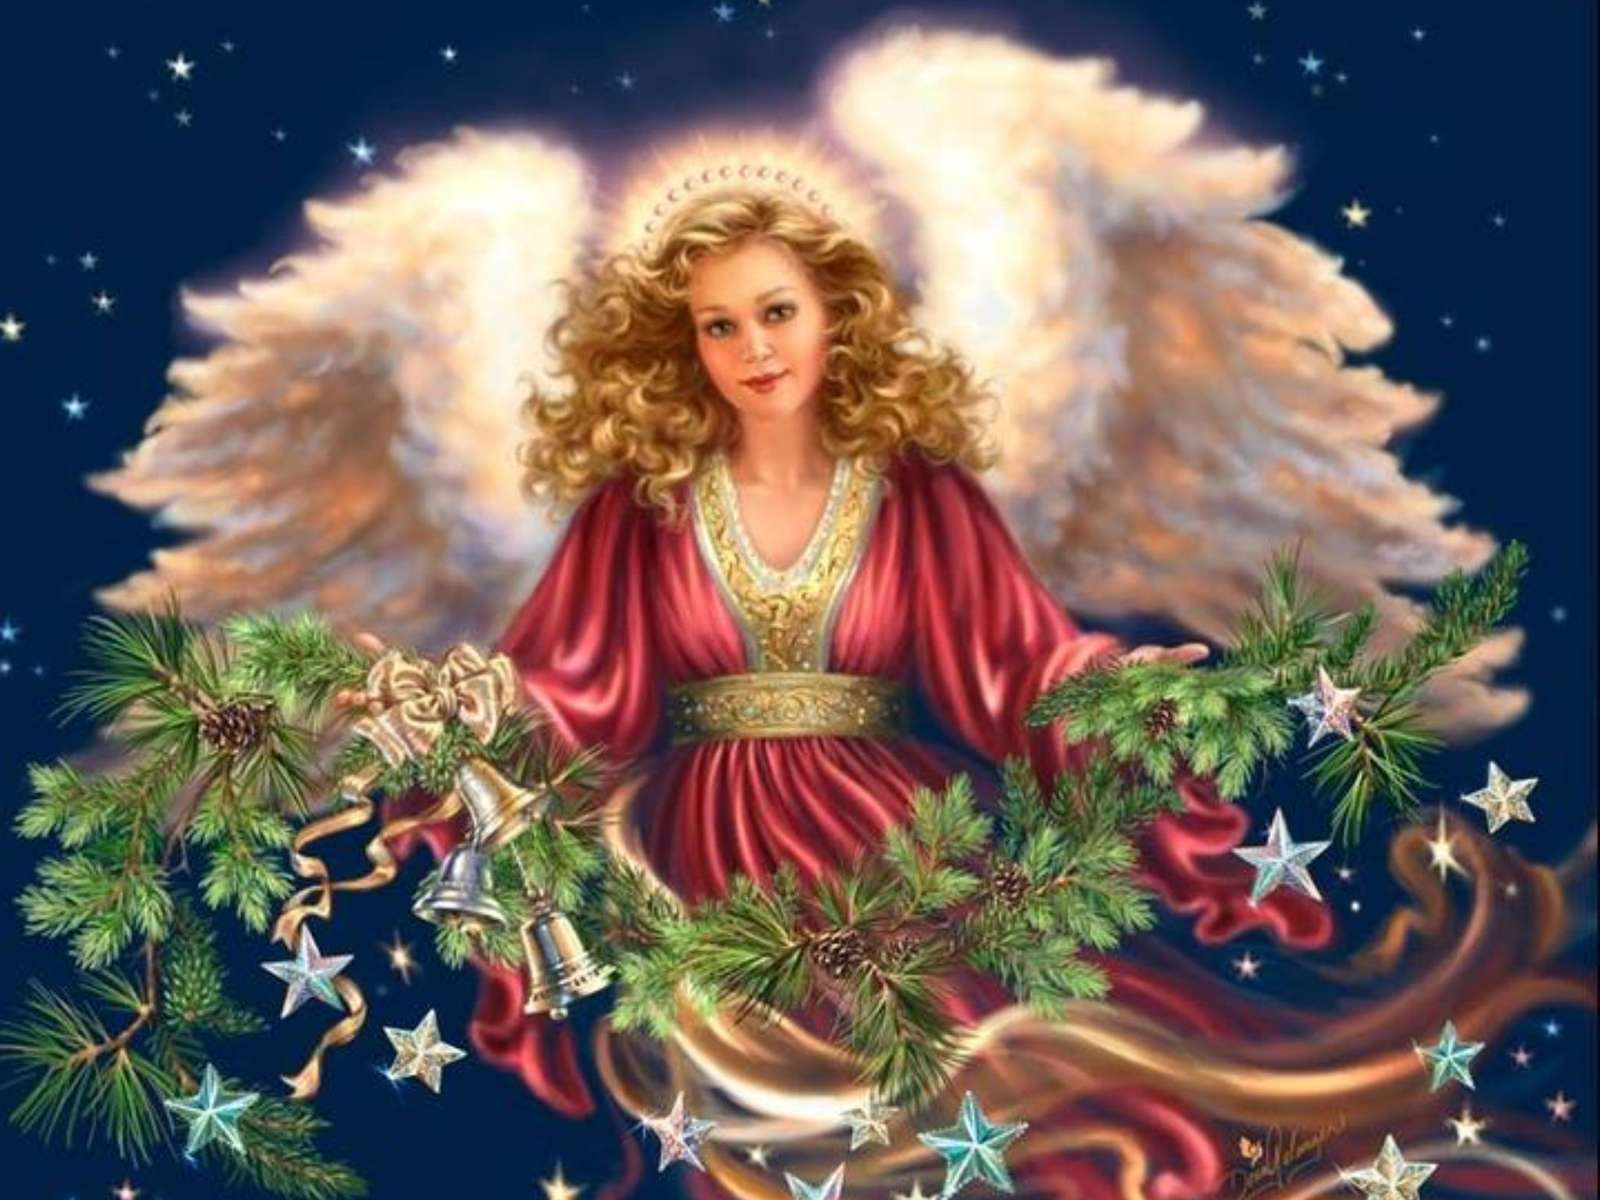 Angelic In Spirit puzzle online from photo